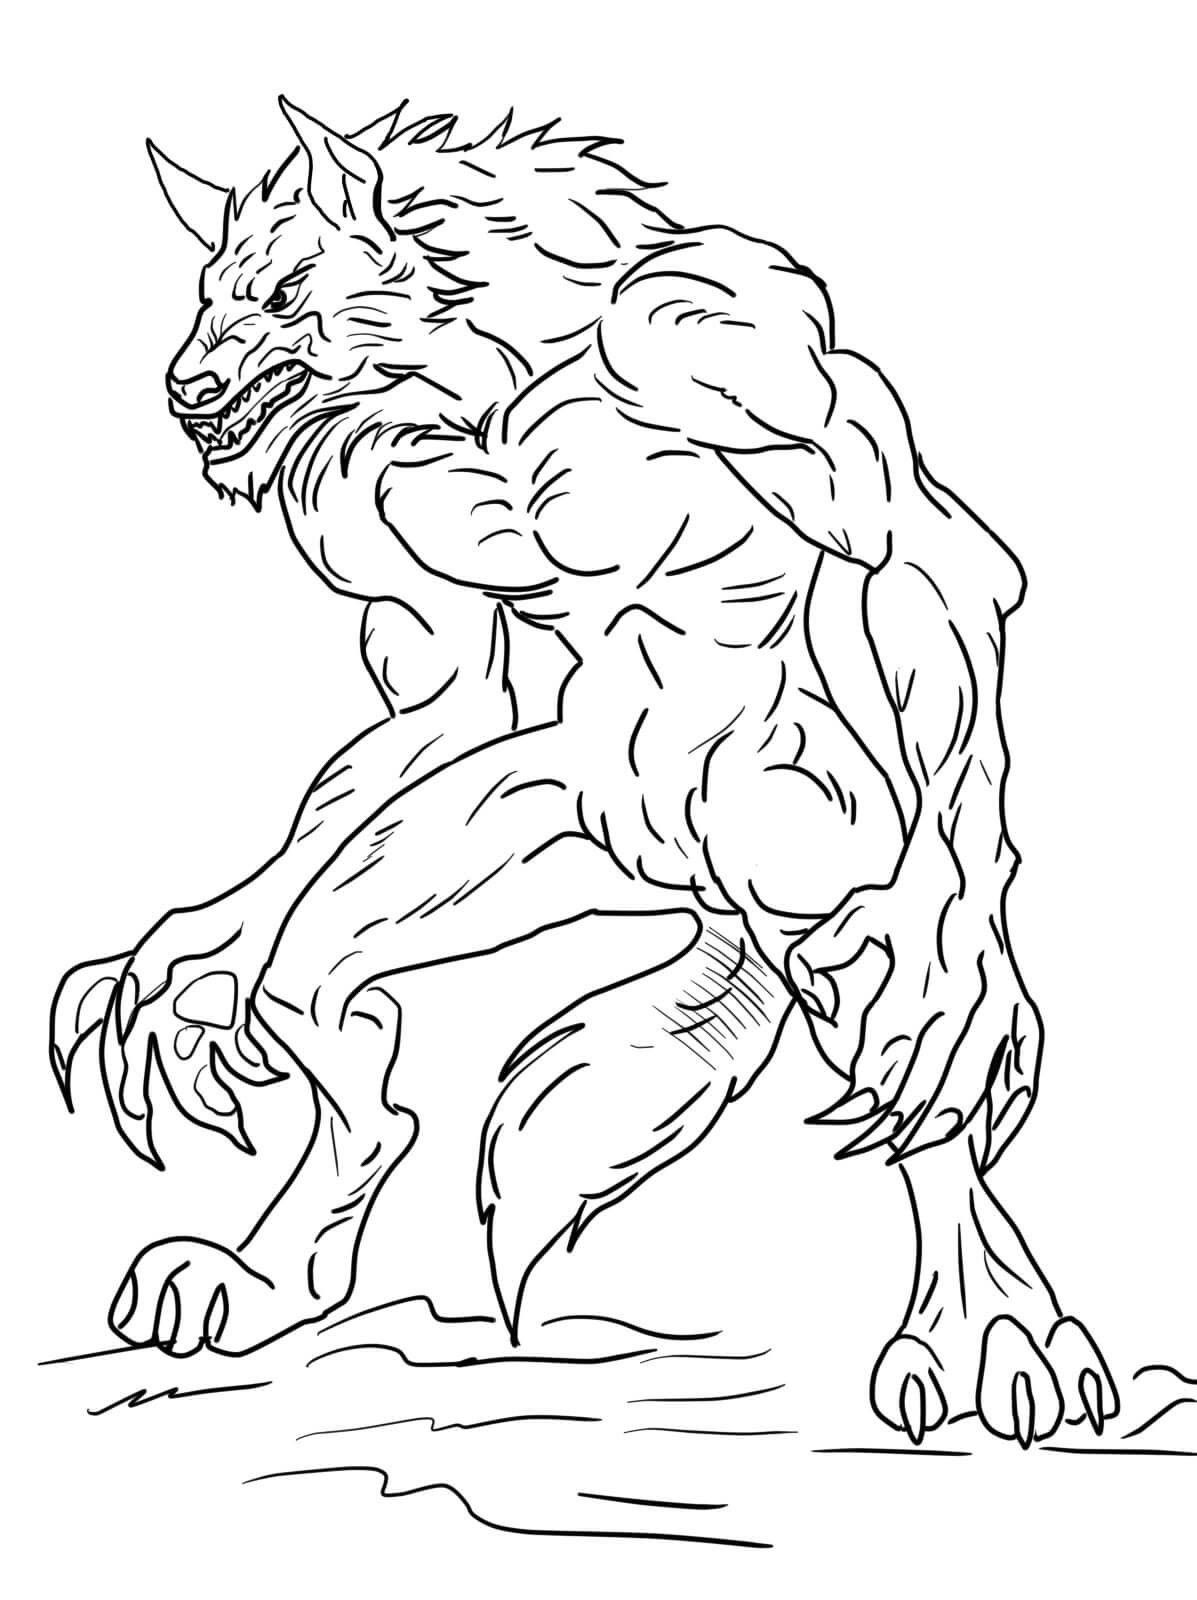 werewolf-coloring-pages-for-kids-2.jpg